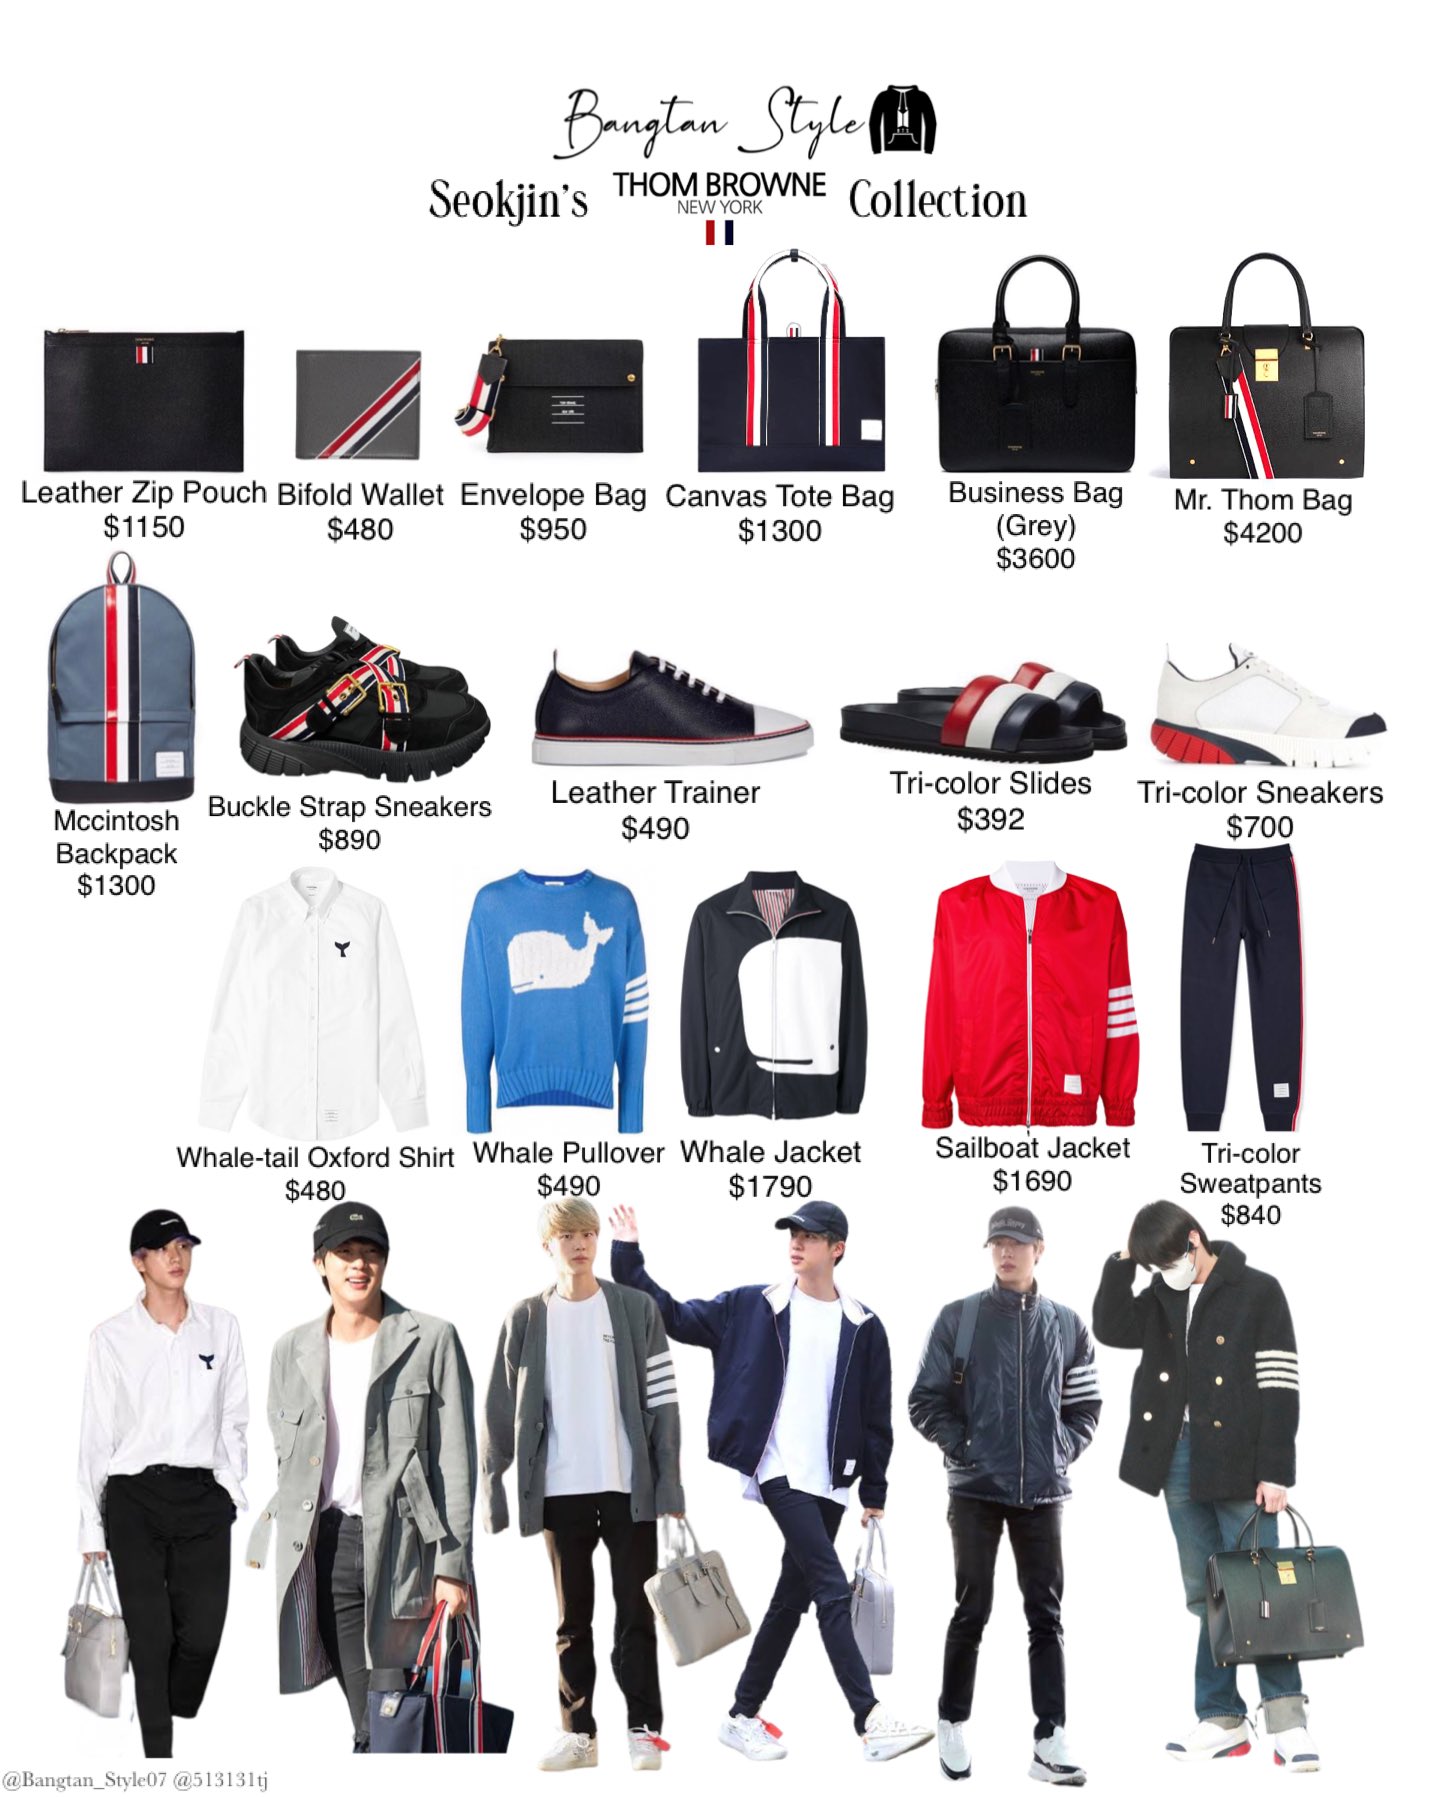 How Kim Seokjin was a catalyst in the Samsung and Thom Browne